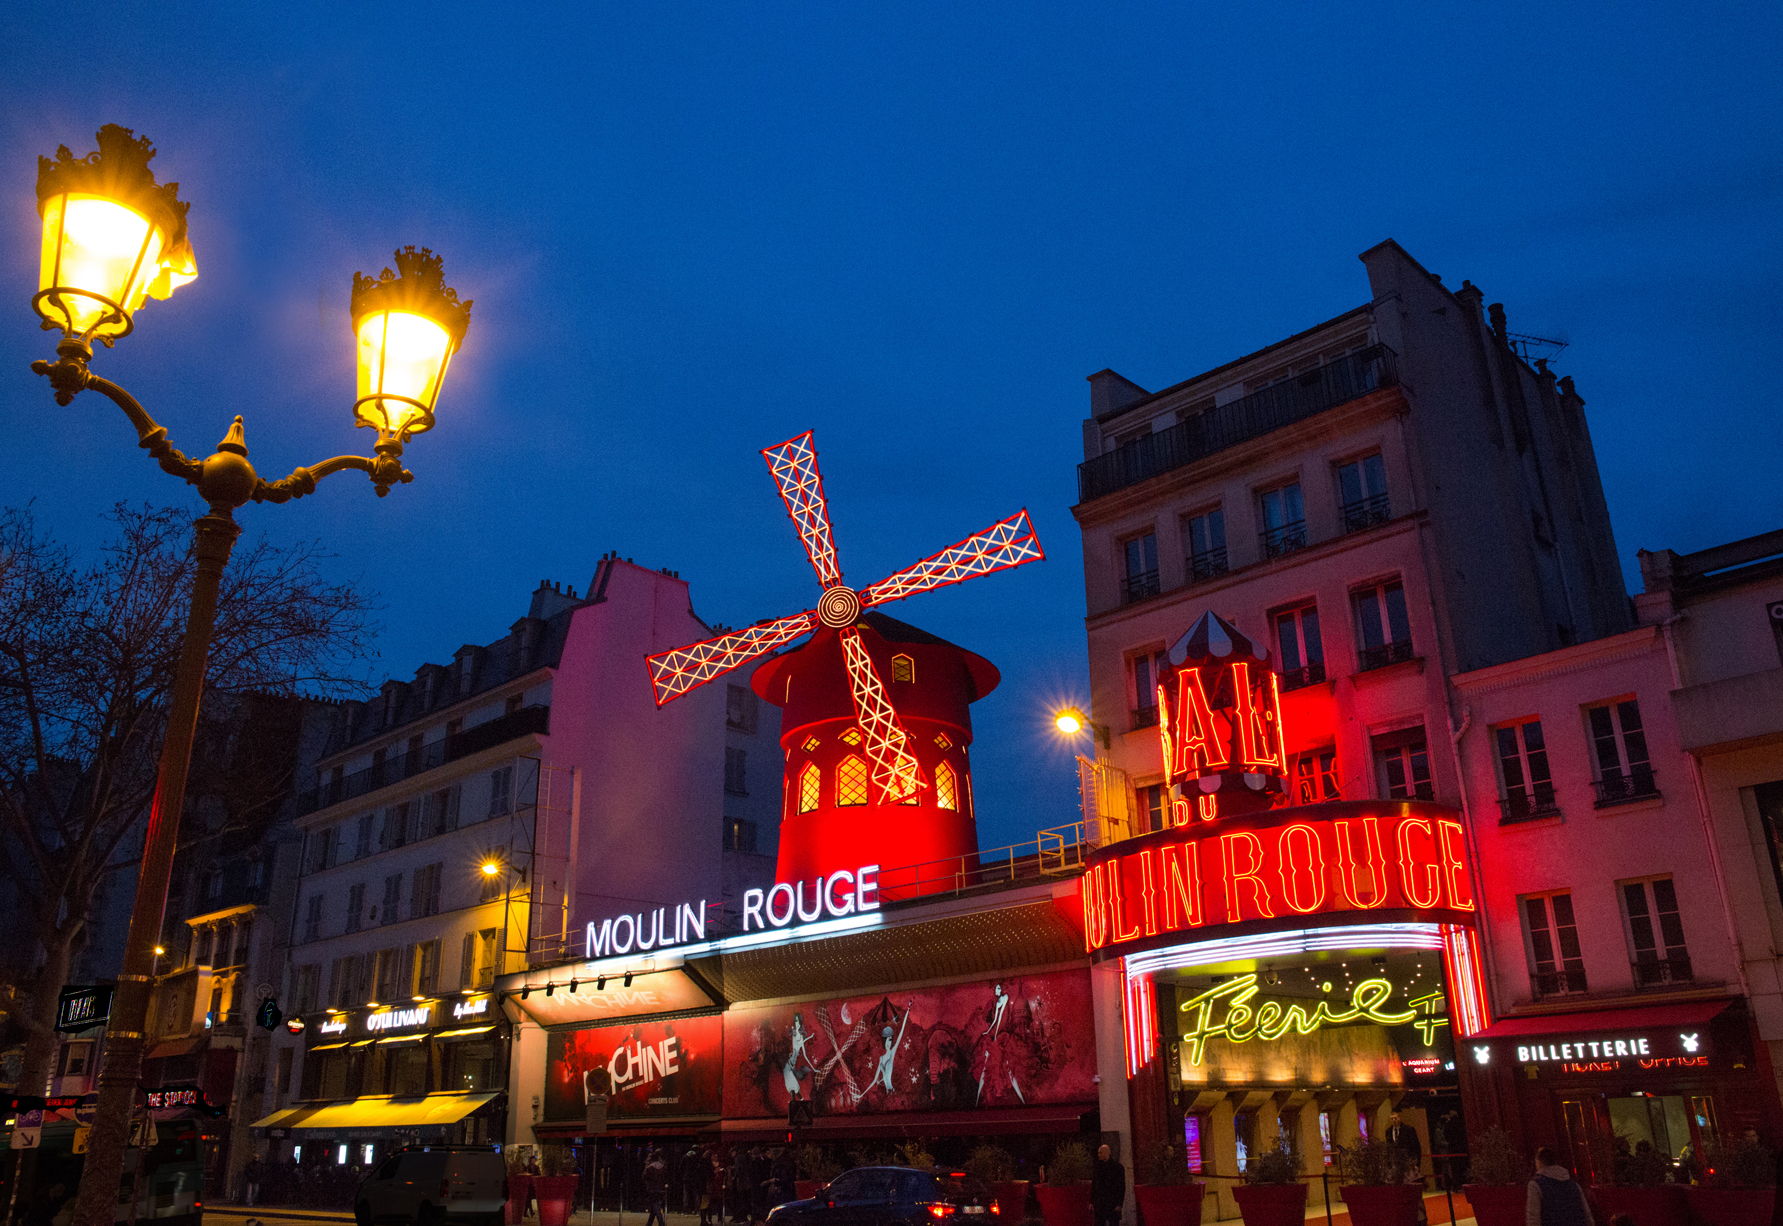 The famous front of the Moulin Rouge ​
Photo credit: © Moulin Rouge – ​
​
D. Duguet ​